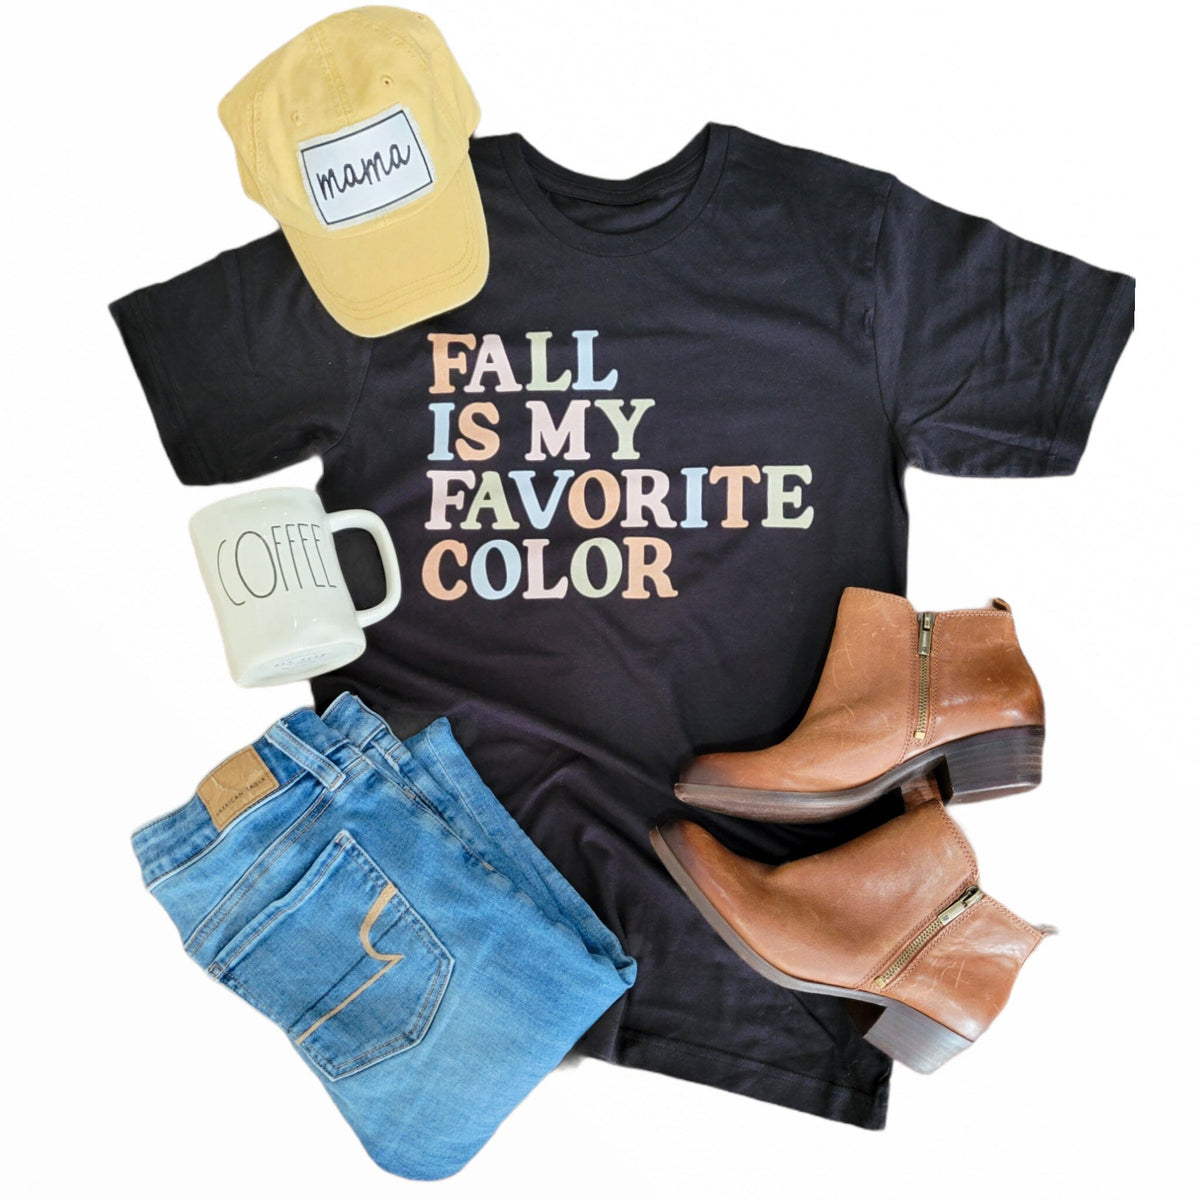 Fall is My Favorite Color Adult Tee